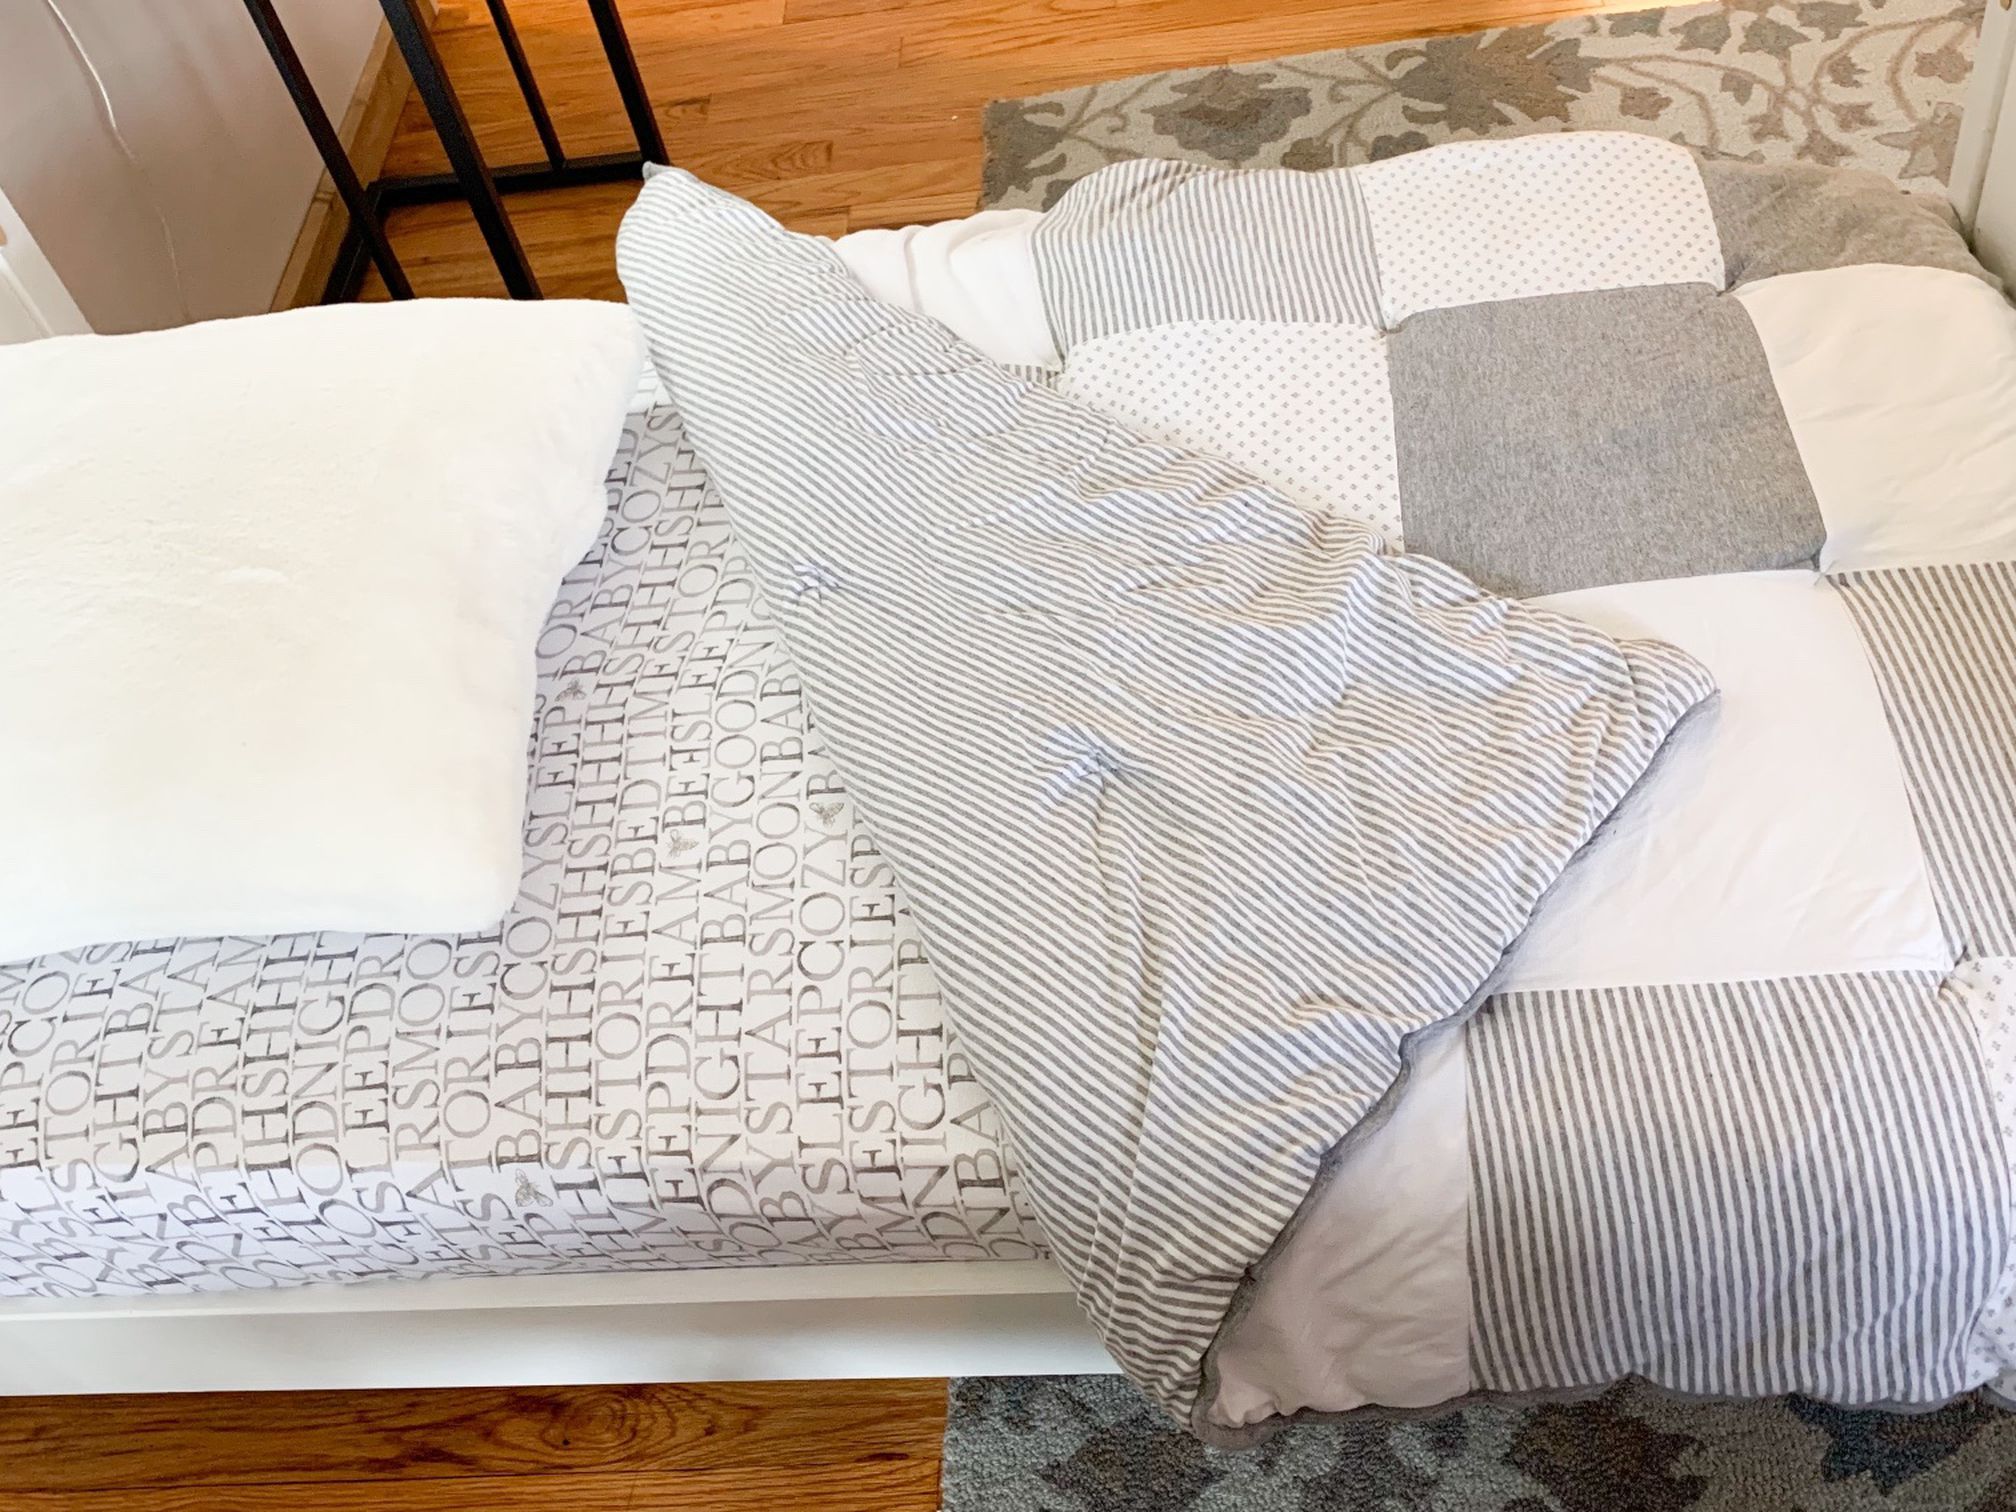 White Toddler Bed, Mattress, And Bedding!